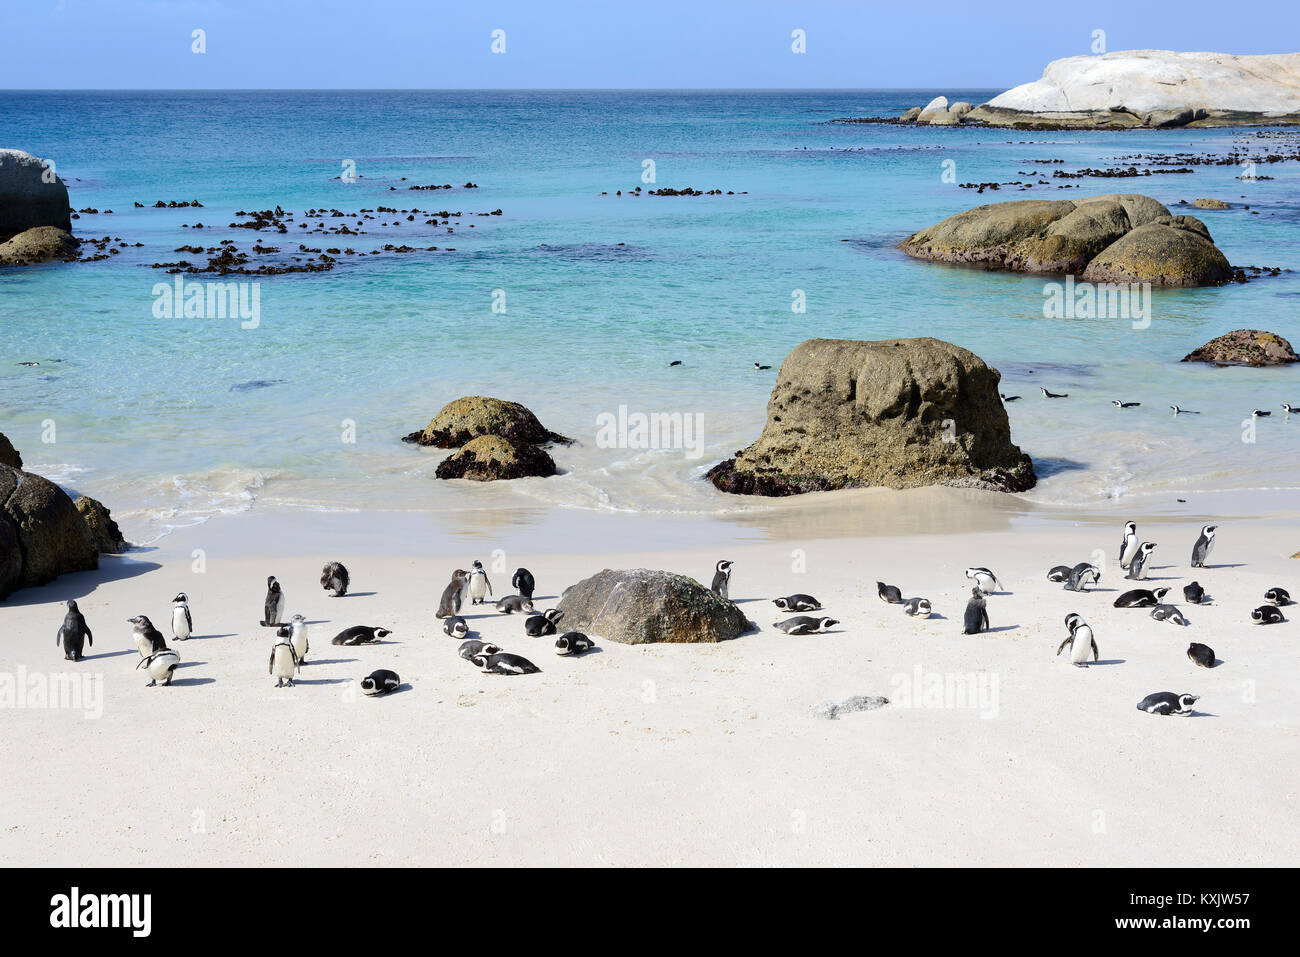 Colony of African penguins,Spheniscus demersus, Boulders Beach or Boulders Bay, Simons Town, South Africa, Indian Ocean Stock Photo